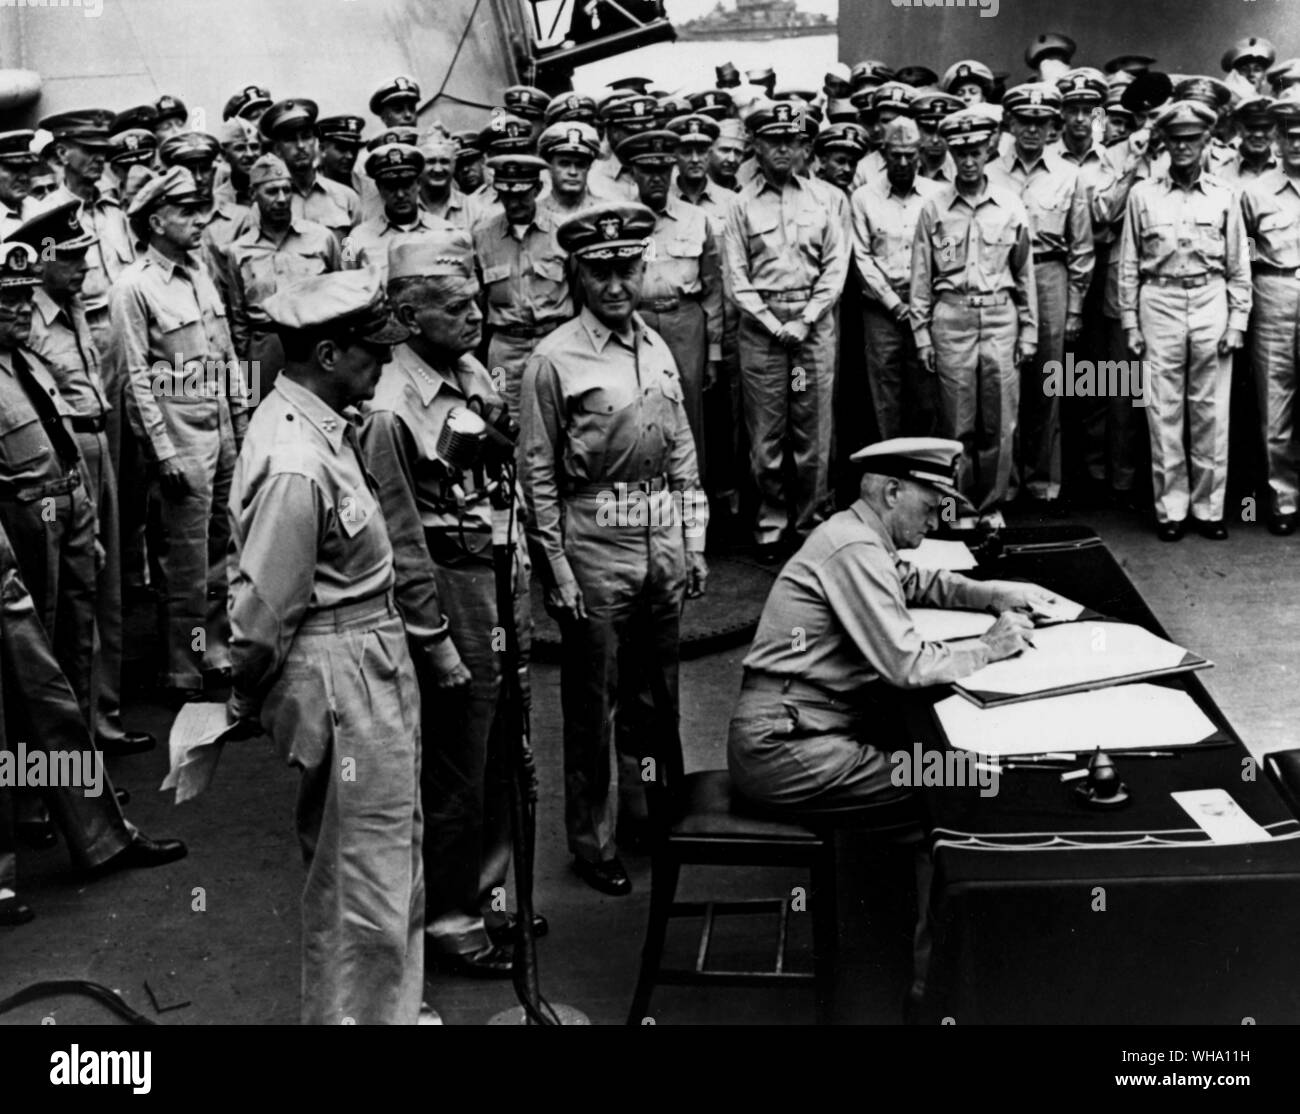 WW2: Tokyo Bay, Japan. Fleet Admiral Chester W Nimitz signs the Japanese surrender document aboard the battleship, USS Missouri (BB-63). Looking on from the left are: General Douglas MacArthur, Admiral William F Halsey and Rear Admiral Forrest P Sherman. Stock Photo